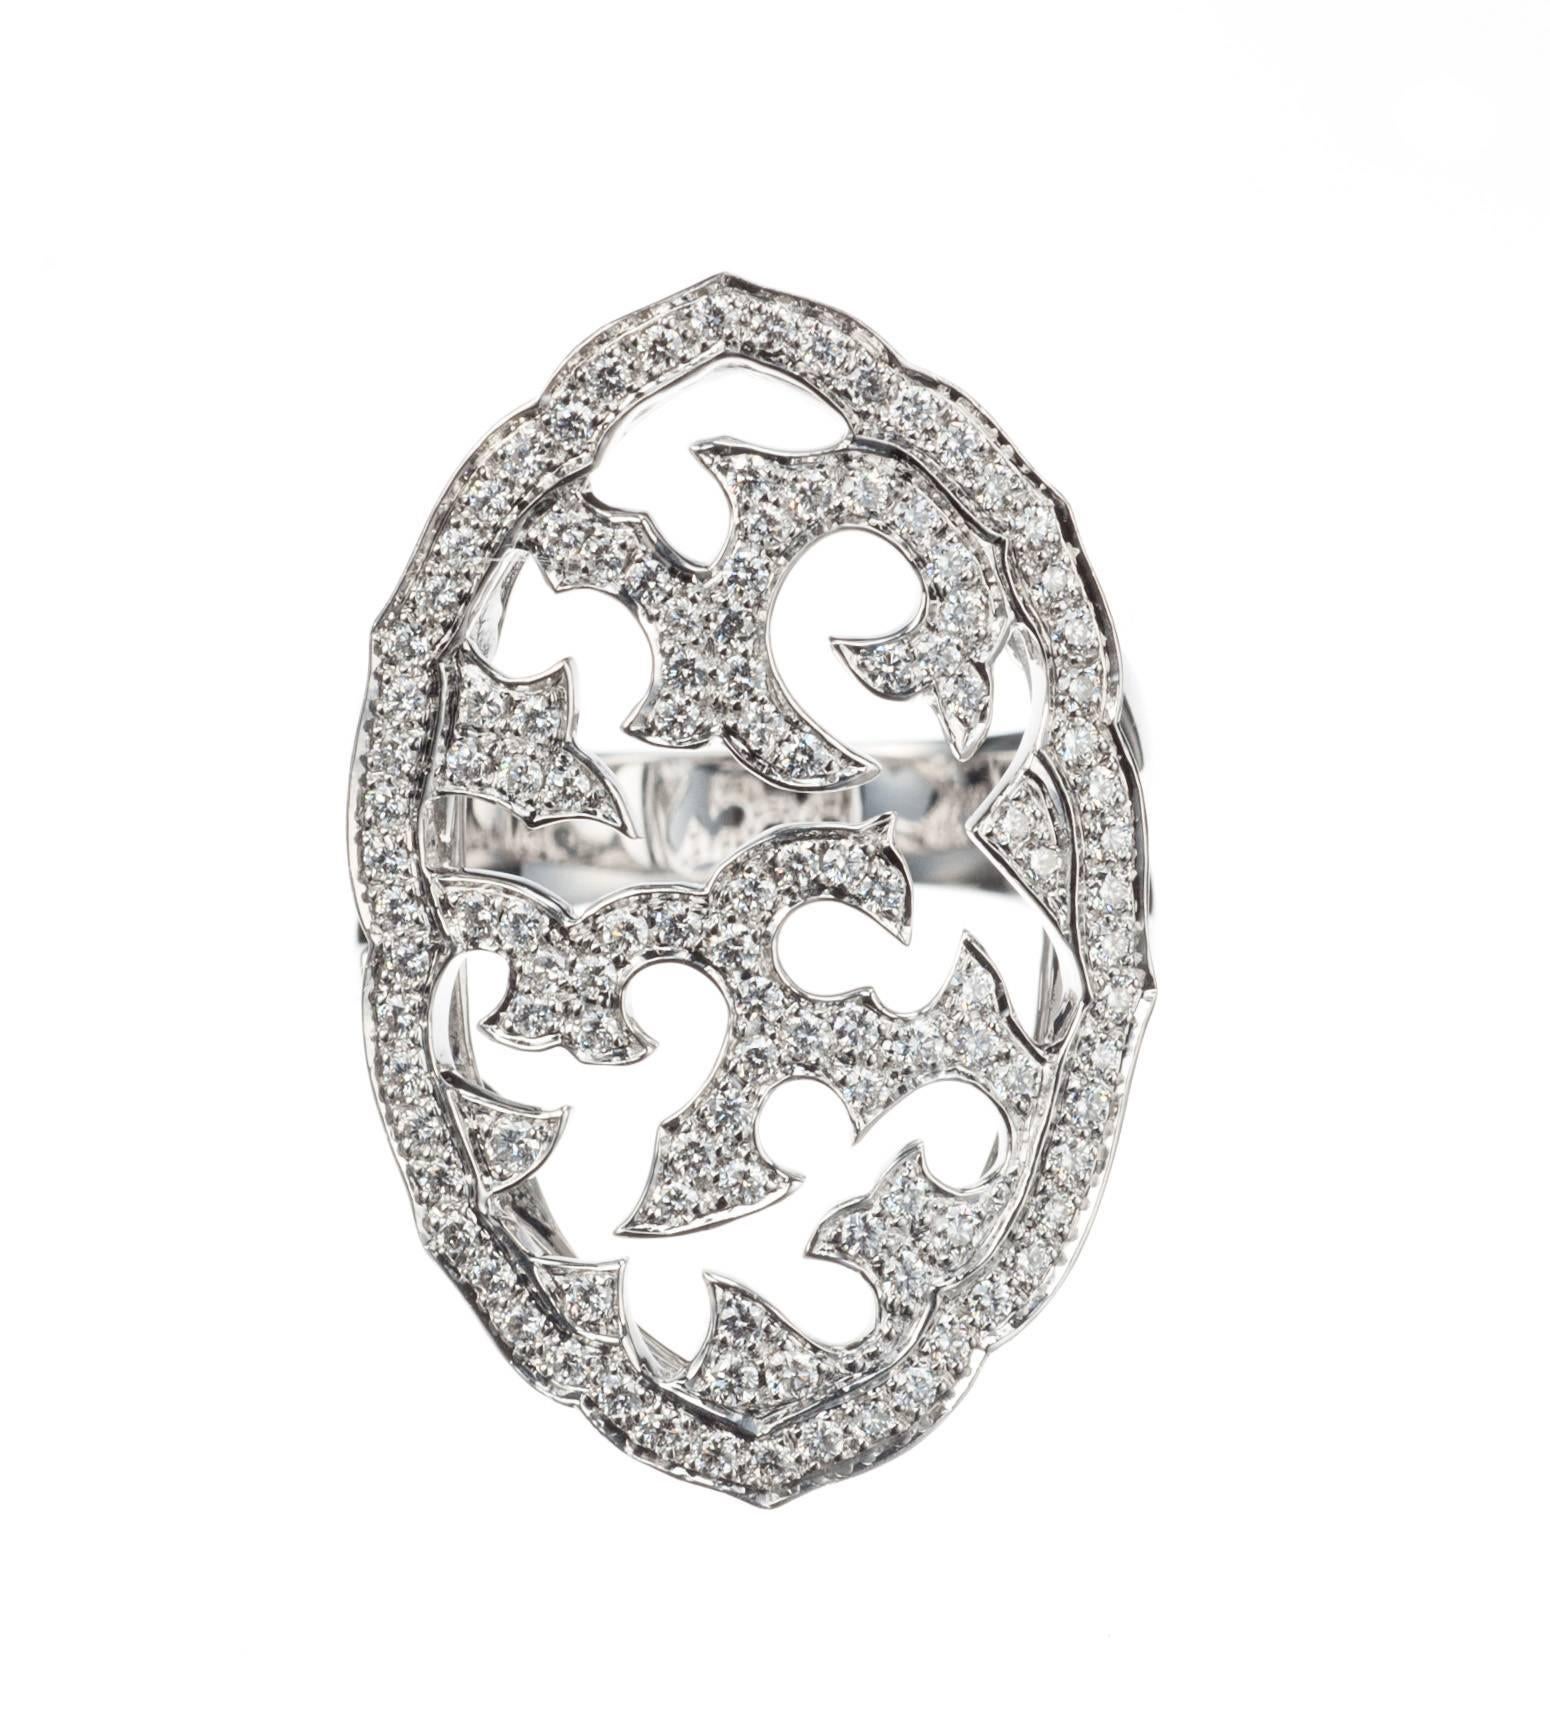 A dramatic oval panel of openwork is set throughout with 63 brilliant-cut round diamonds, .77ctw. of G-H color and SI clarity, on Stephen Webster’s 18-karat white gold “Borneo” ring.  Size 7; can be resized.